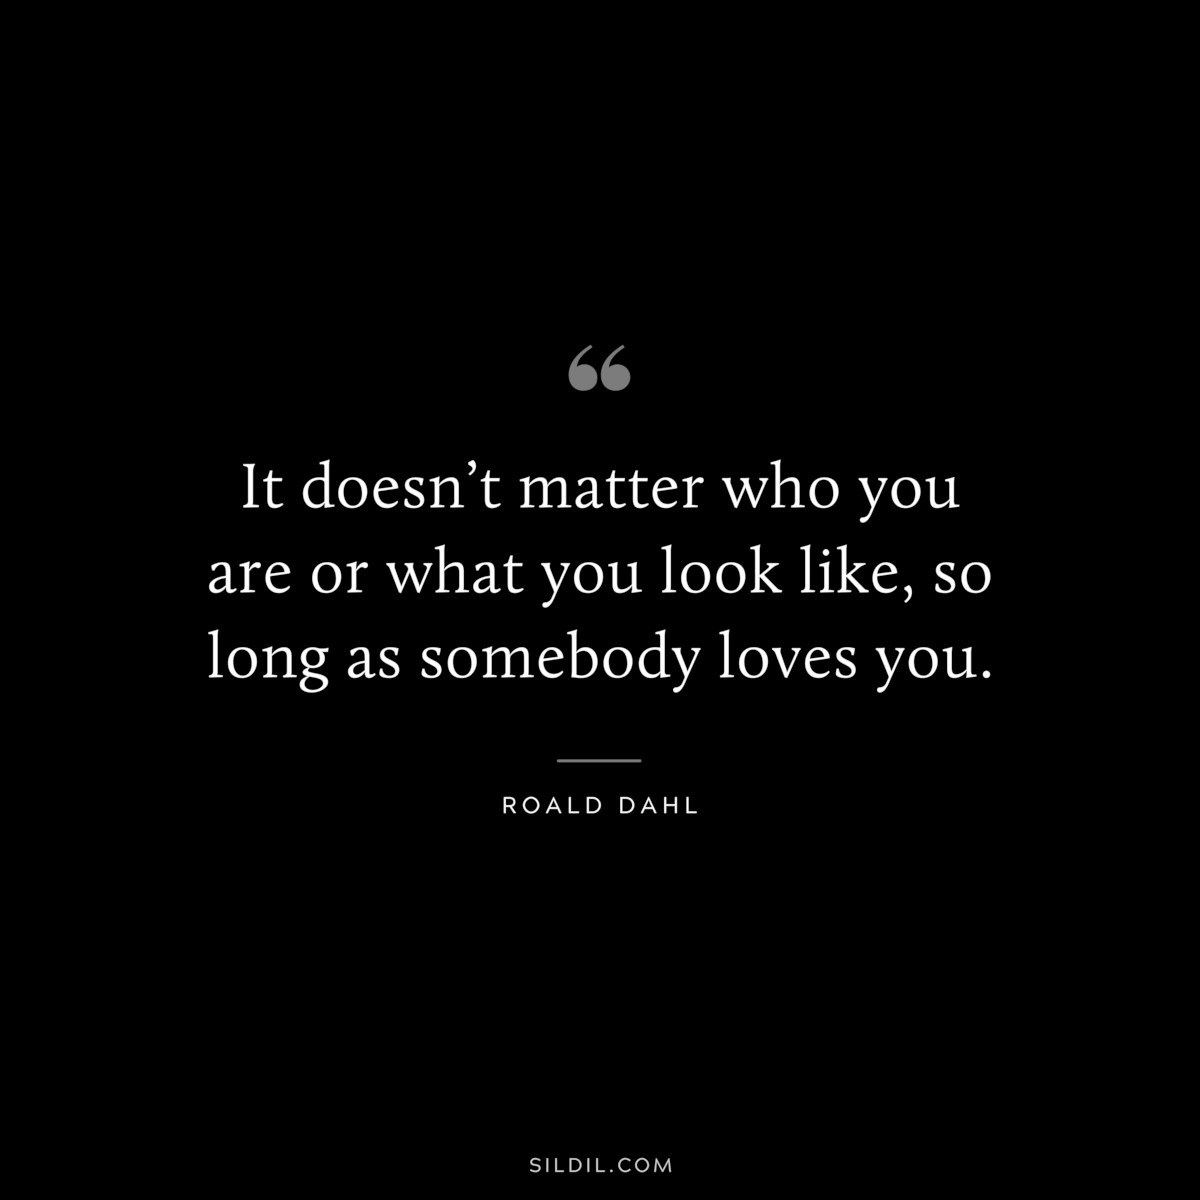 It doesn’t matter who you are or what you look like, so long as somebody loves you. ― Roald Dahl